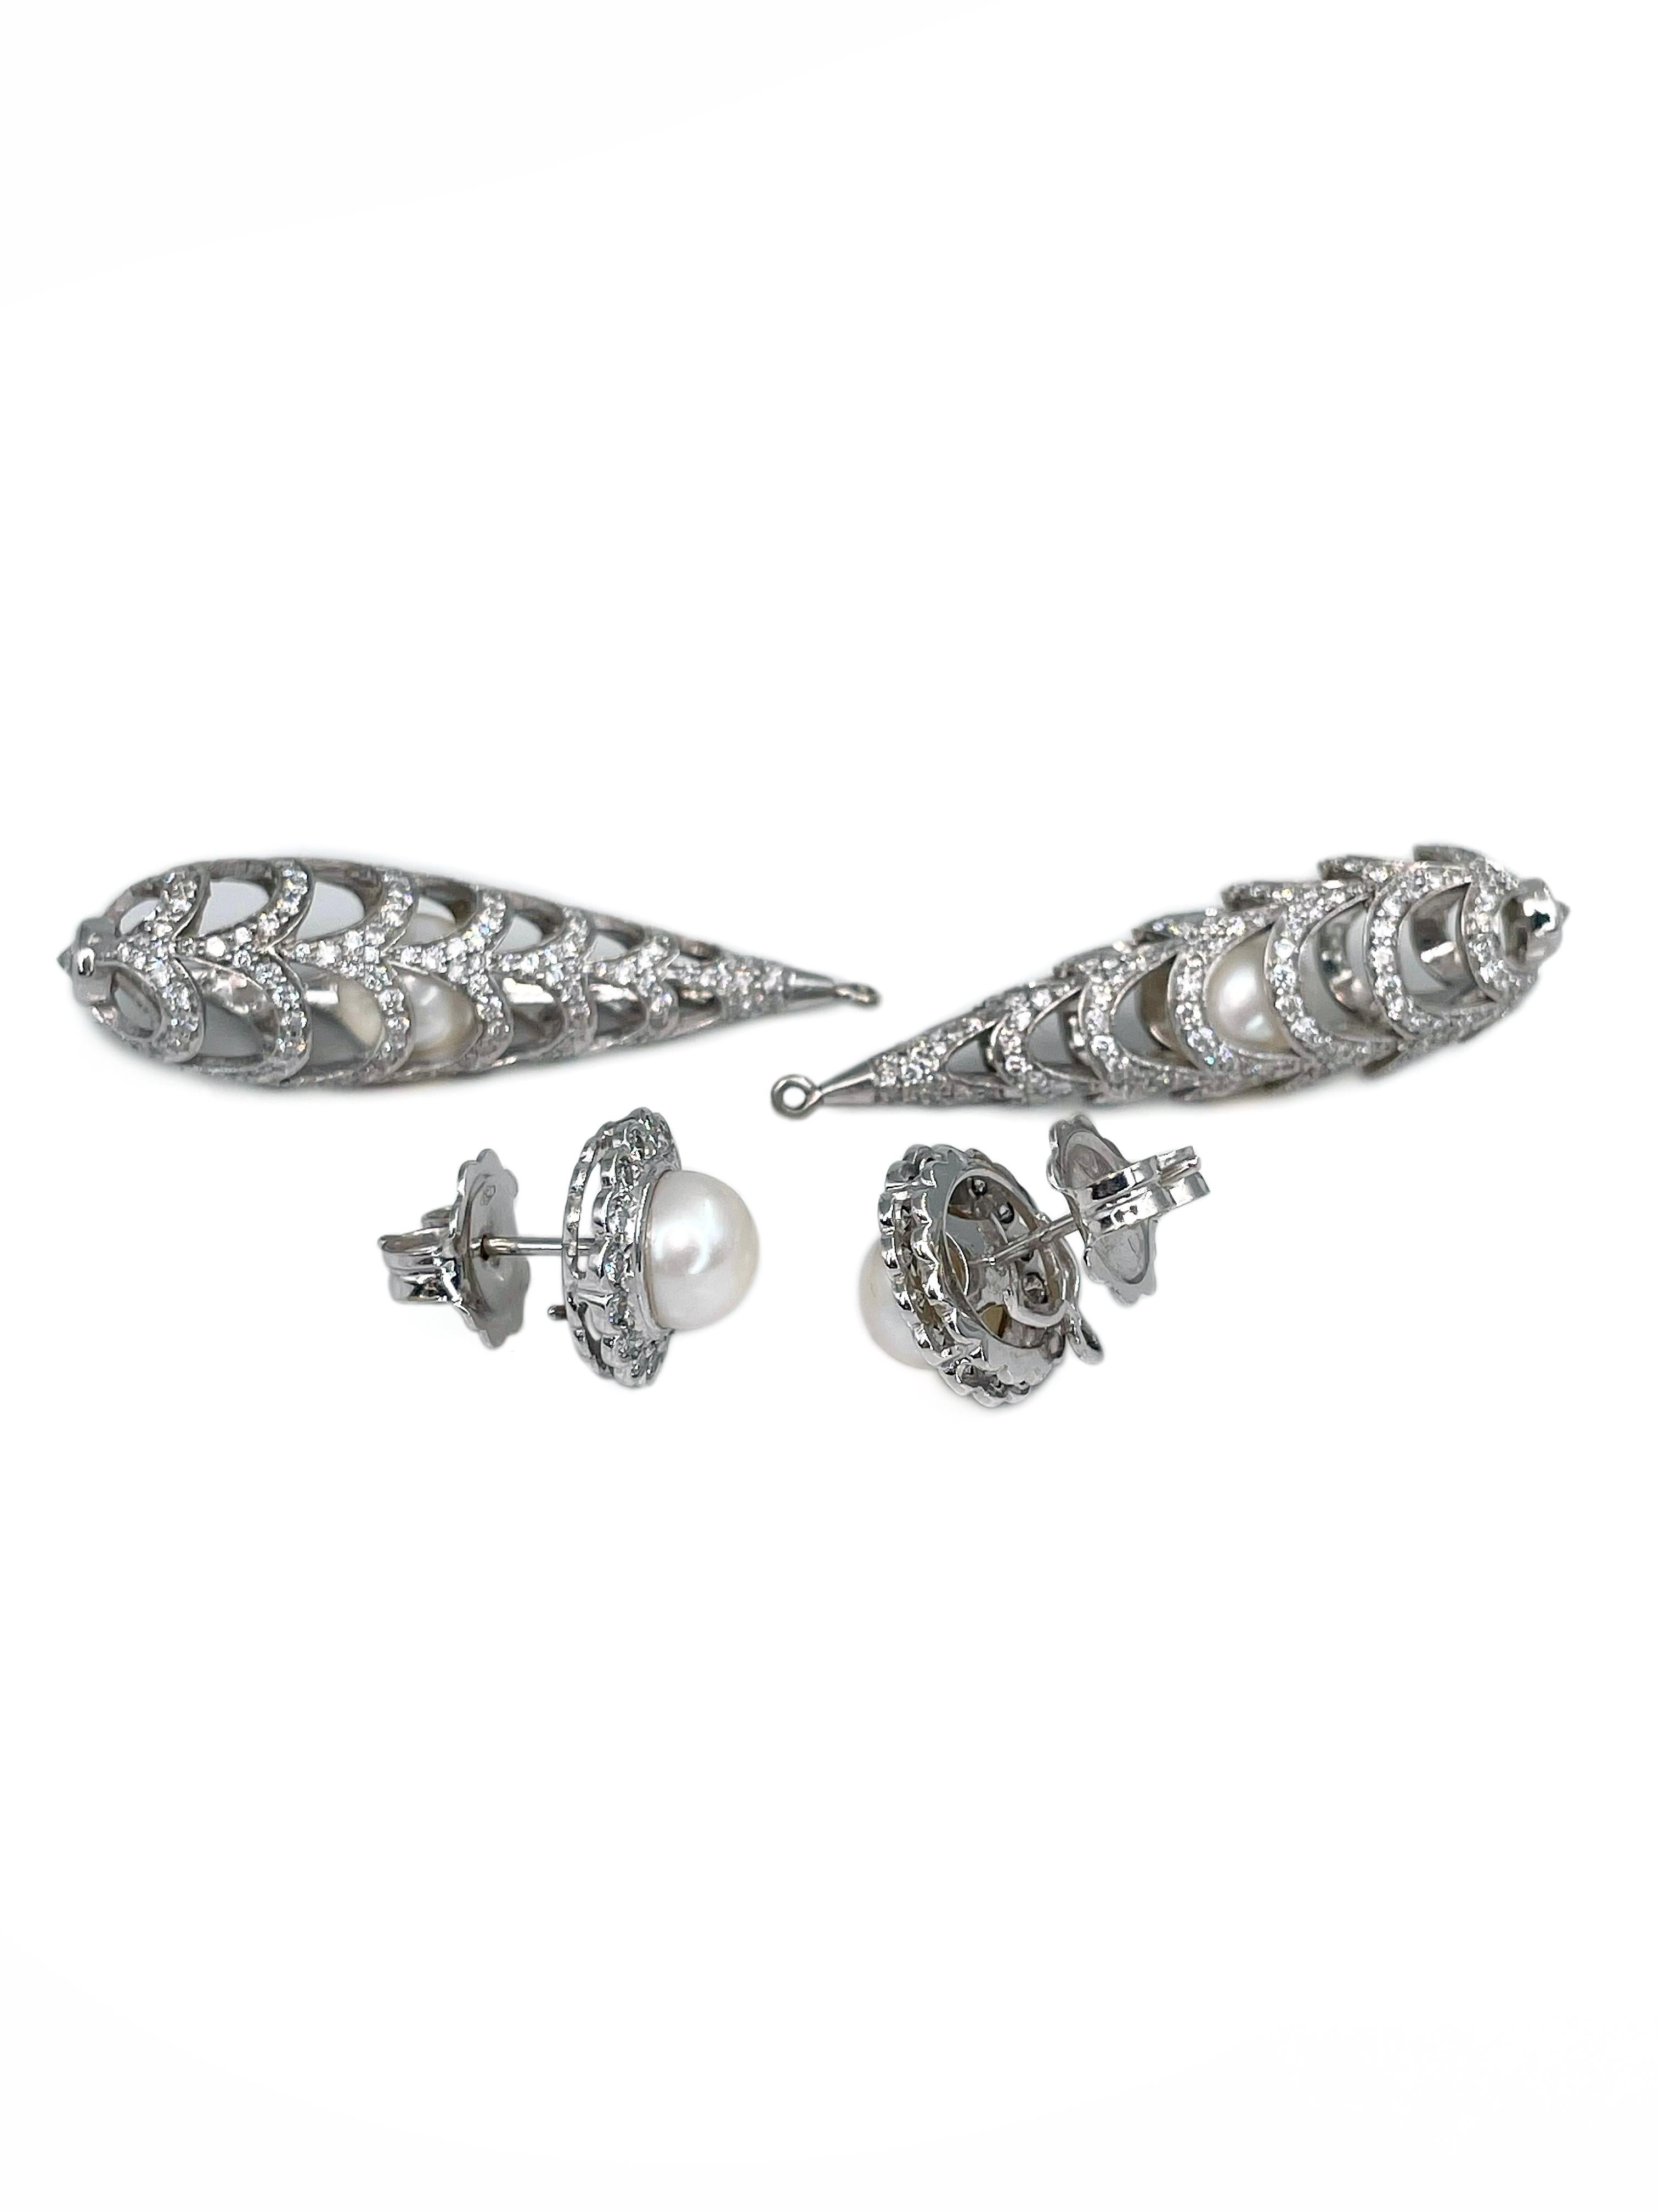 This is a pair of modern design transformable stud earrings crafted in 18K white gold. Circa 2000. 

Can be worn as long or just simple cluster earrings.

It features: 
- 4 cultured pearls 
- 556 diamonds (round brilliant cut, TW 5.80ct, RW-STW,